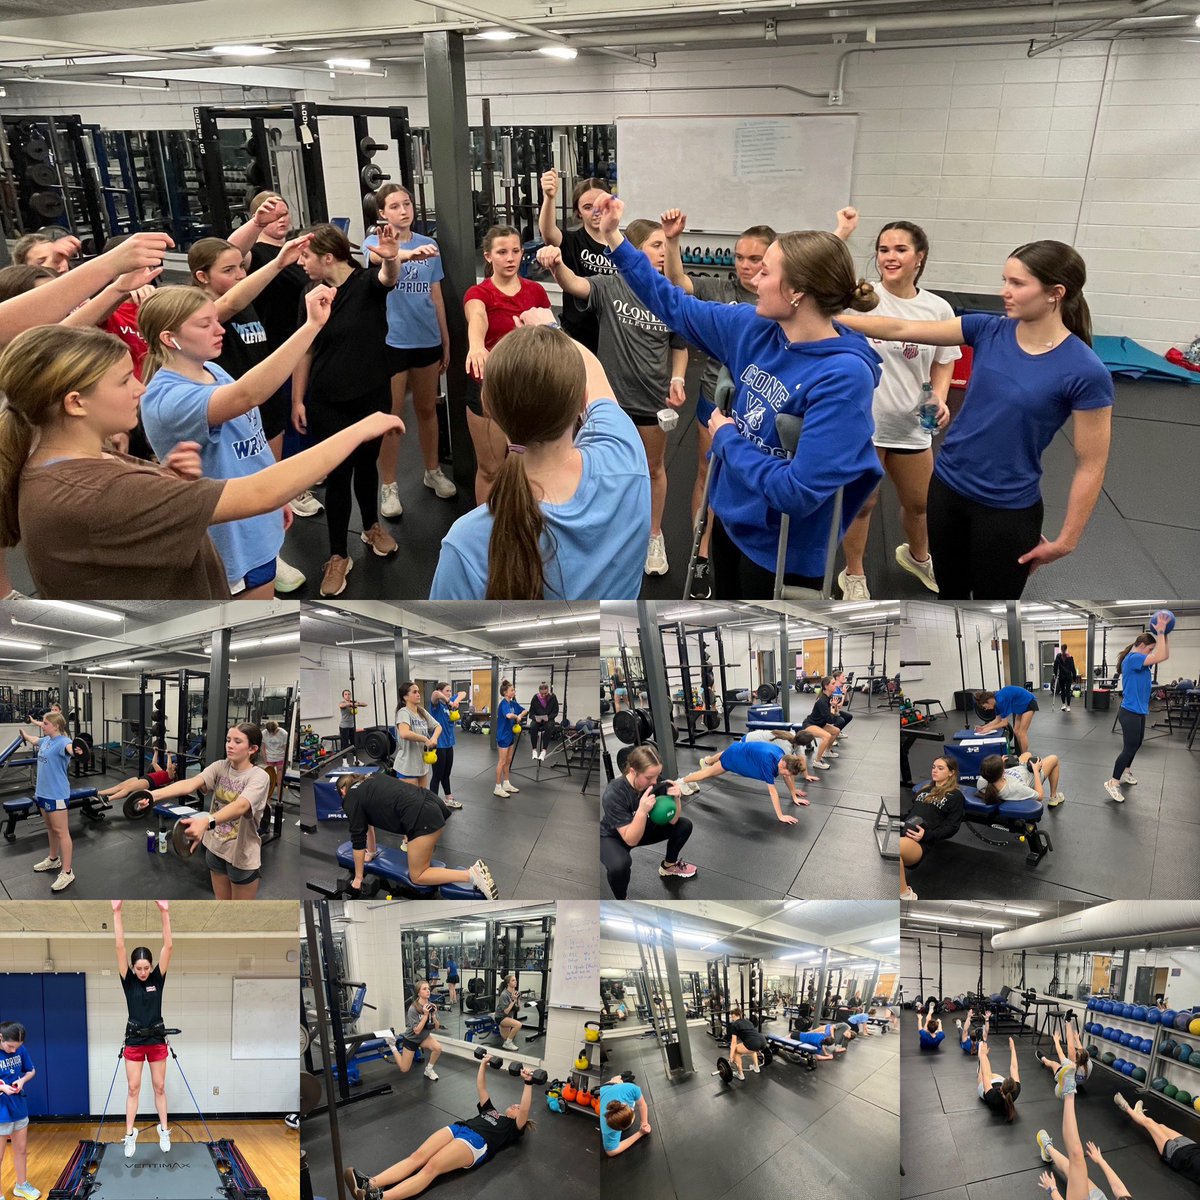 Love the time and effort these girls are putting into Strength and Conditioning this offseason! They are committed and motivated to get stronger and better.